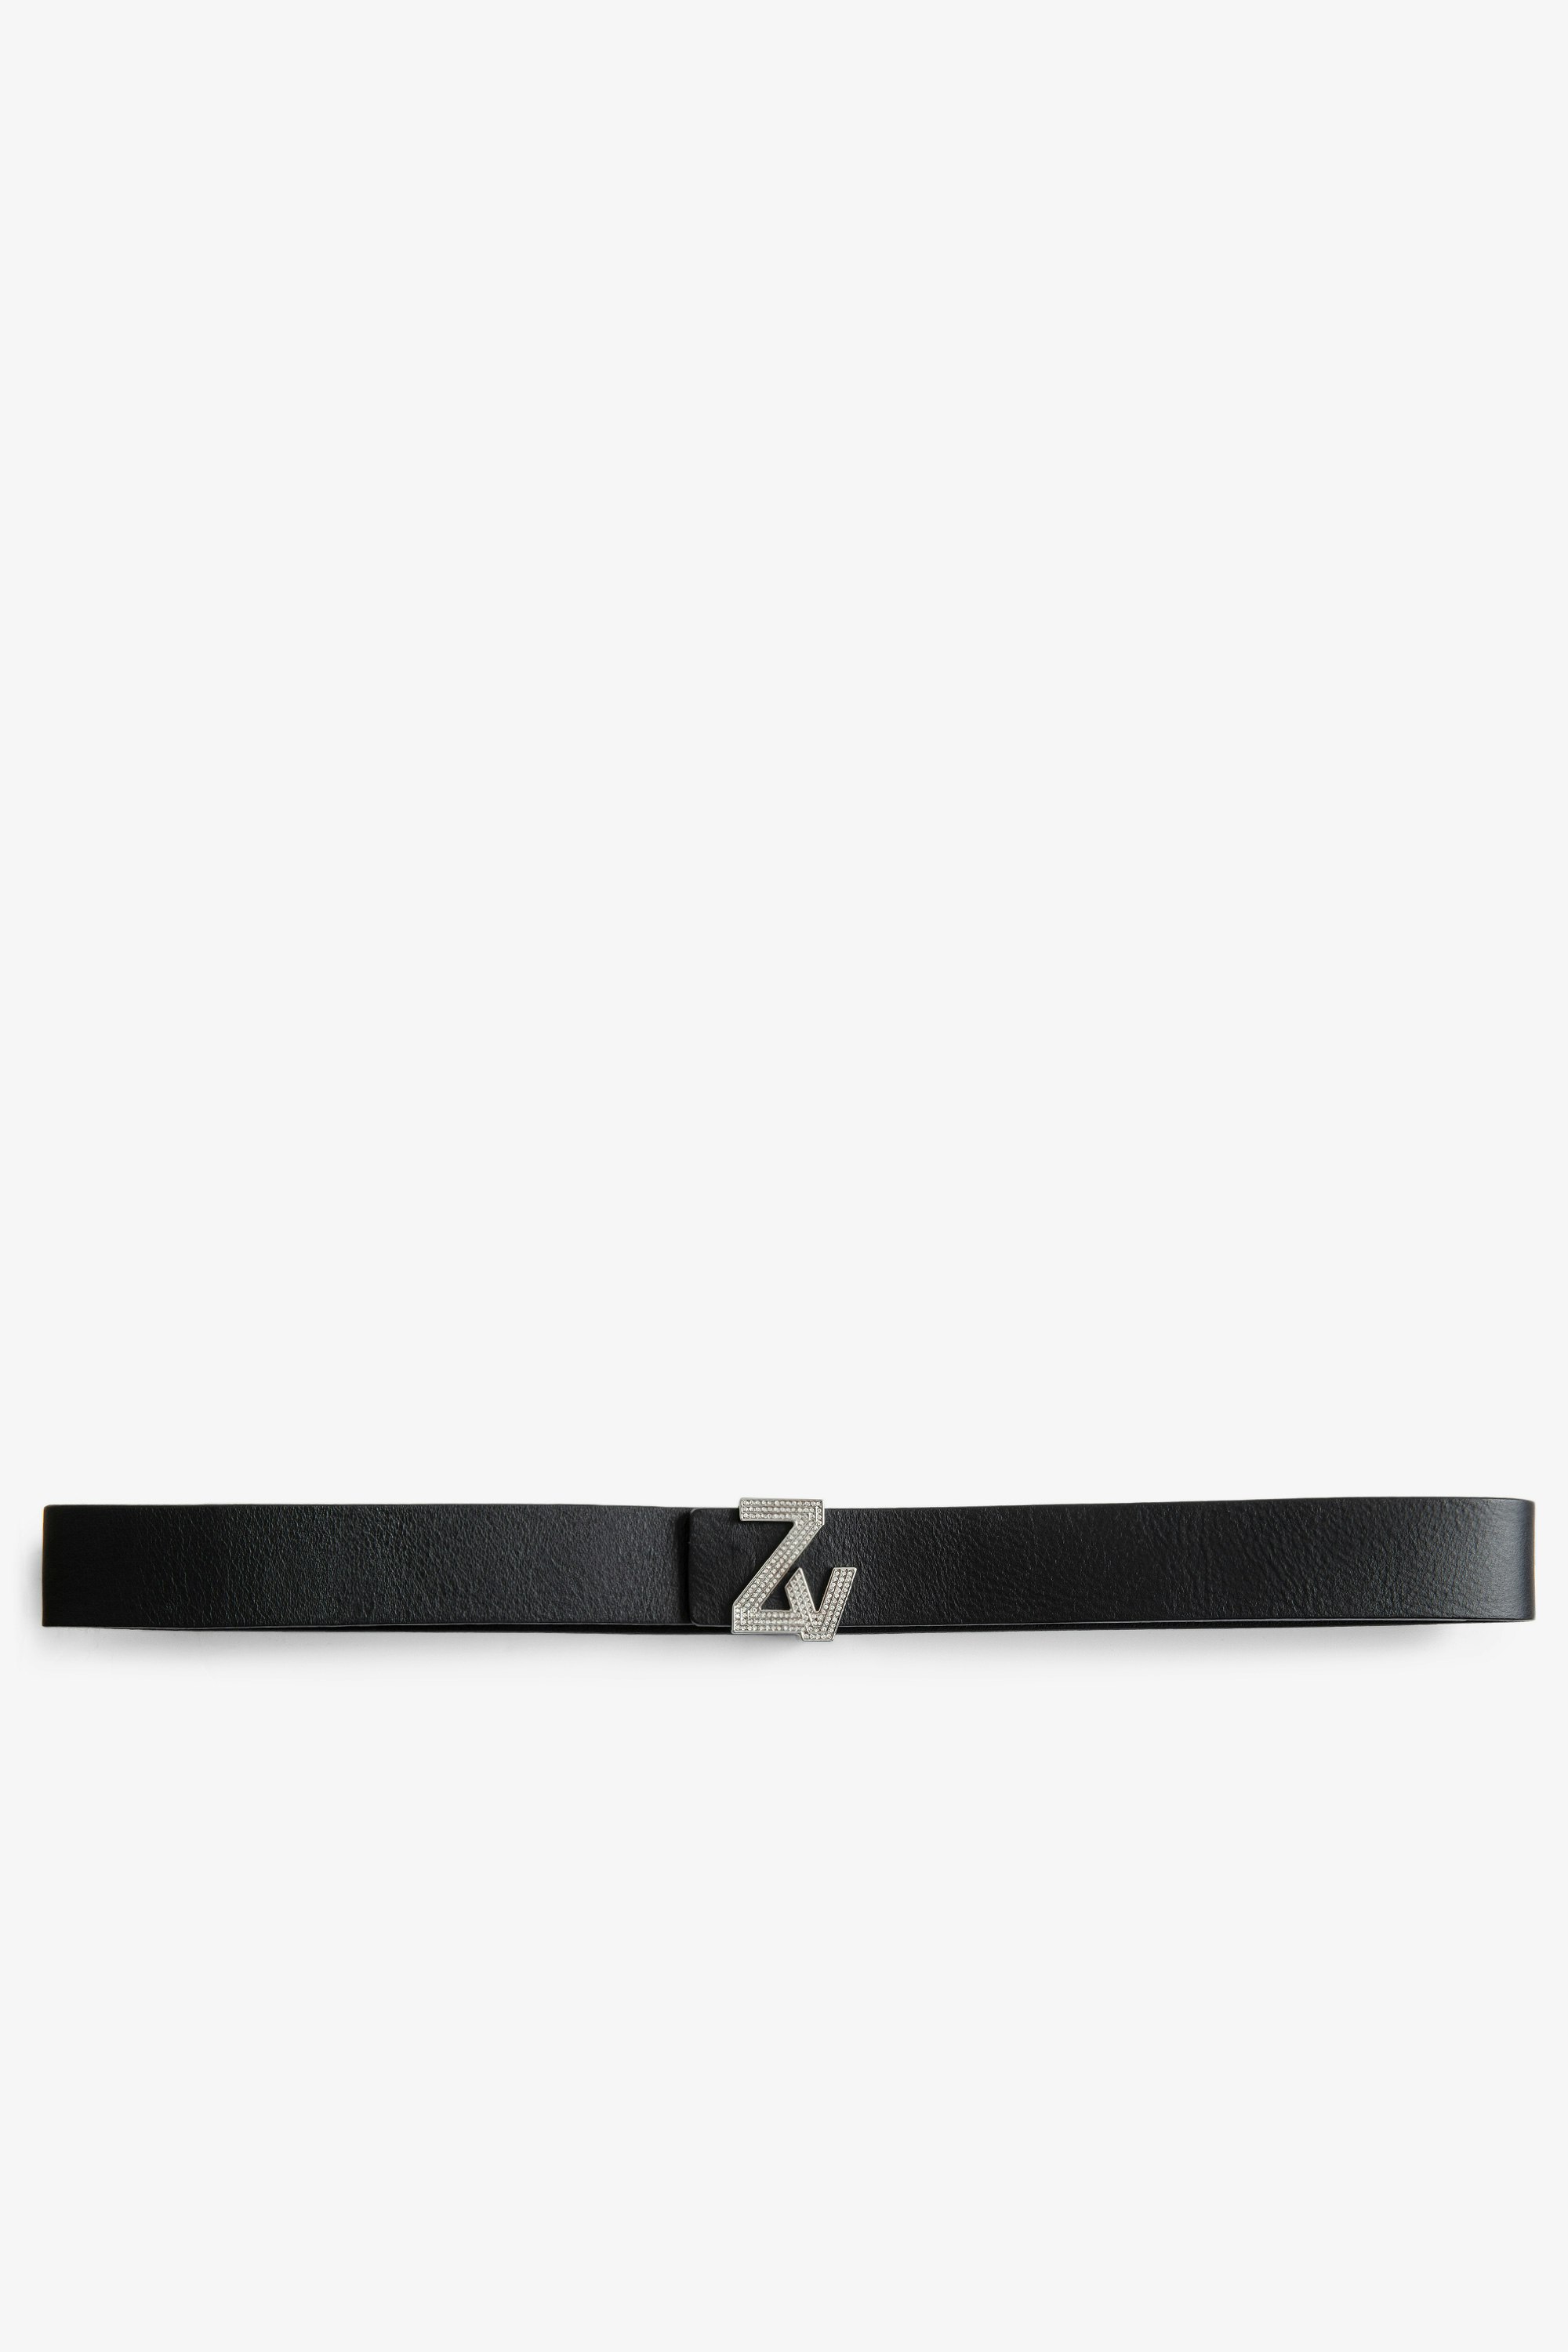 La Mini Belt ZV Initiale Belt With Crystals Women’s black leather ZV Initiale belt with buckle decorated with crystals